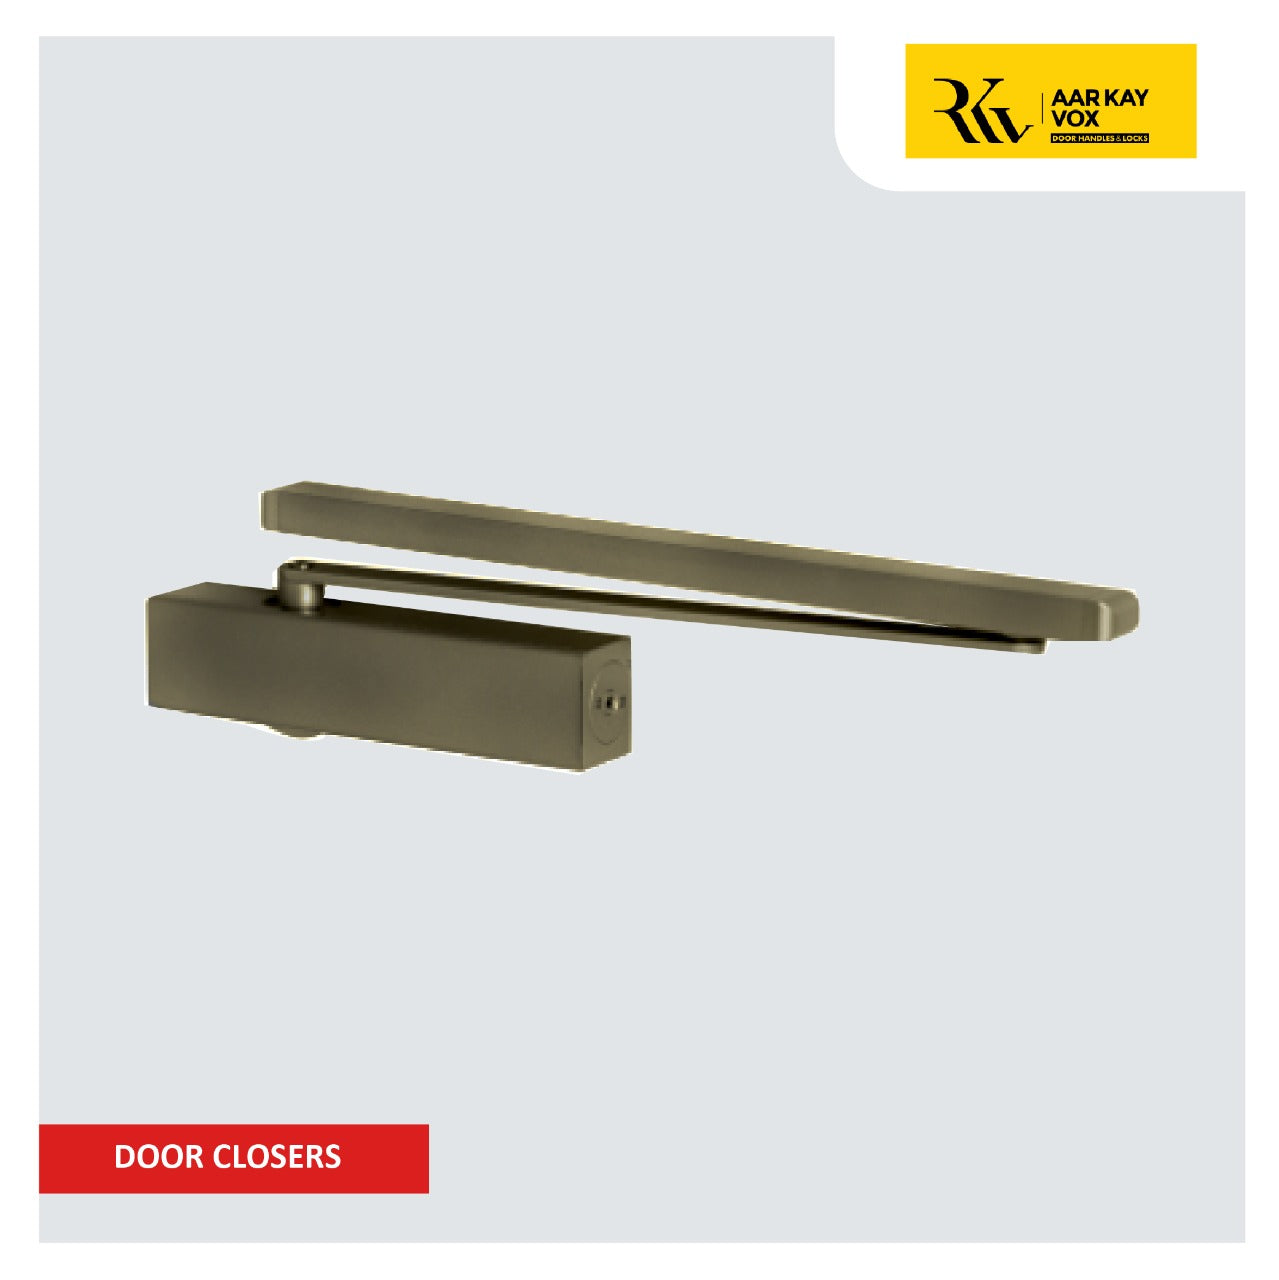 Superior door control with AarKayVox Door Closers by M. M. Noorbhoy & Co - High-quality closers for smooth and secure door operation.